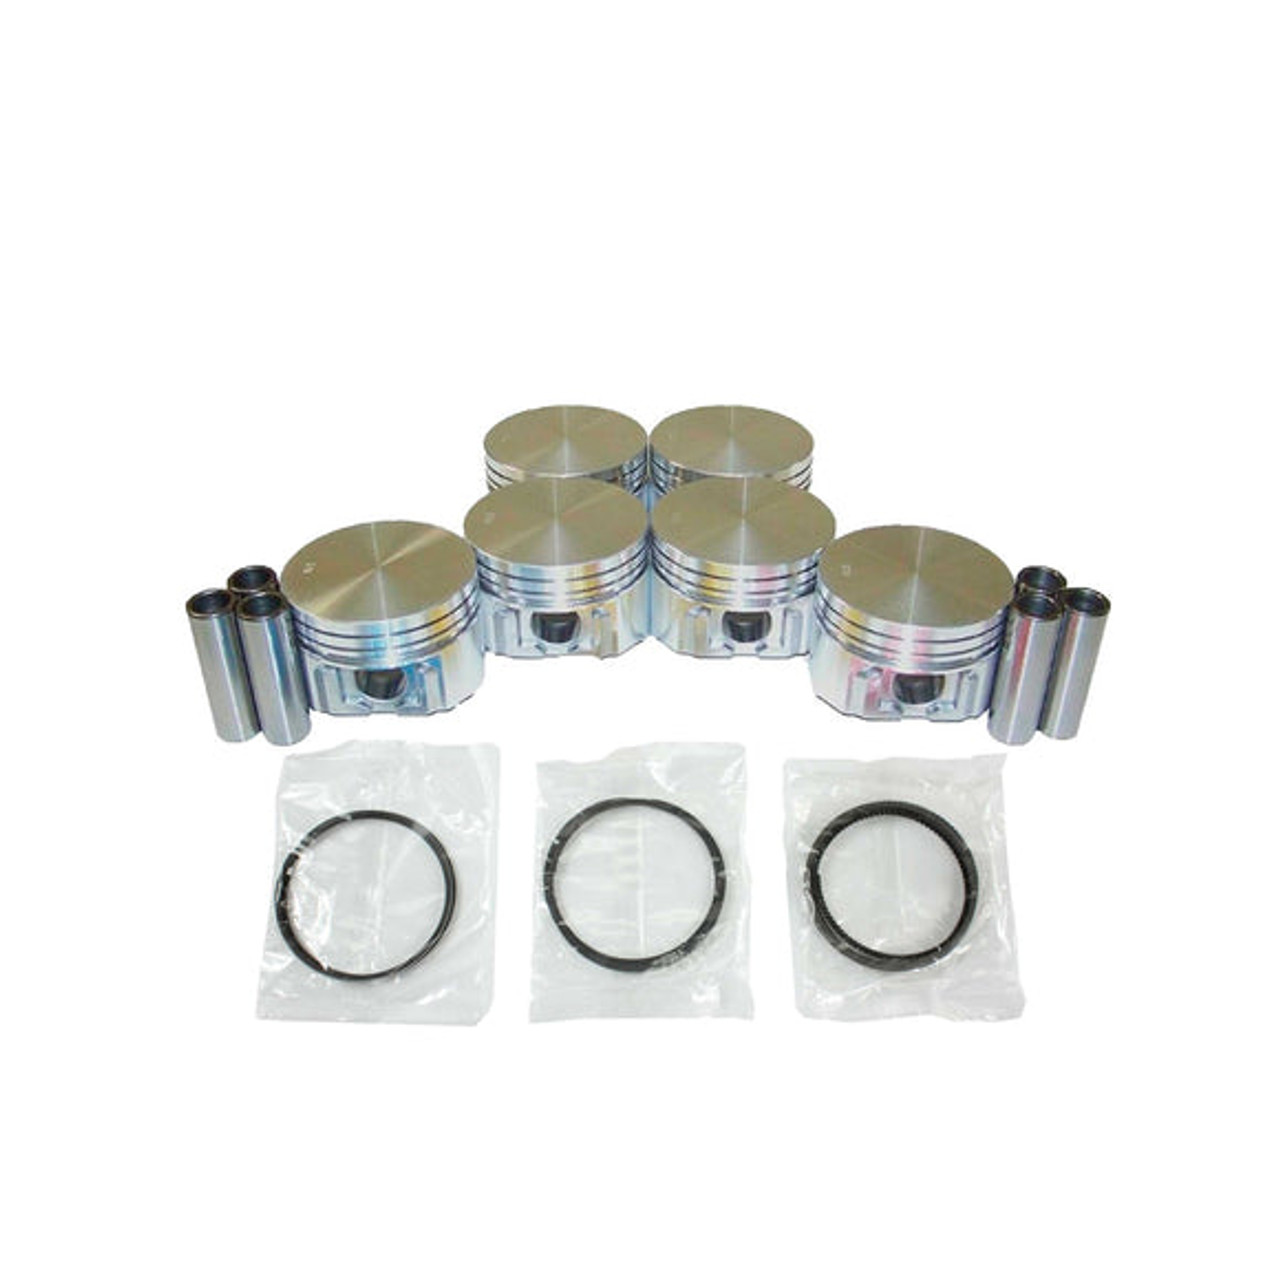 Piston Set with Rings - 1998 Mazda B3000 3.0L Engine Parts # PRK4137ZE89